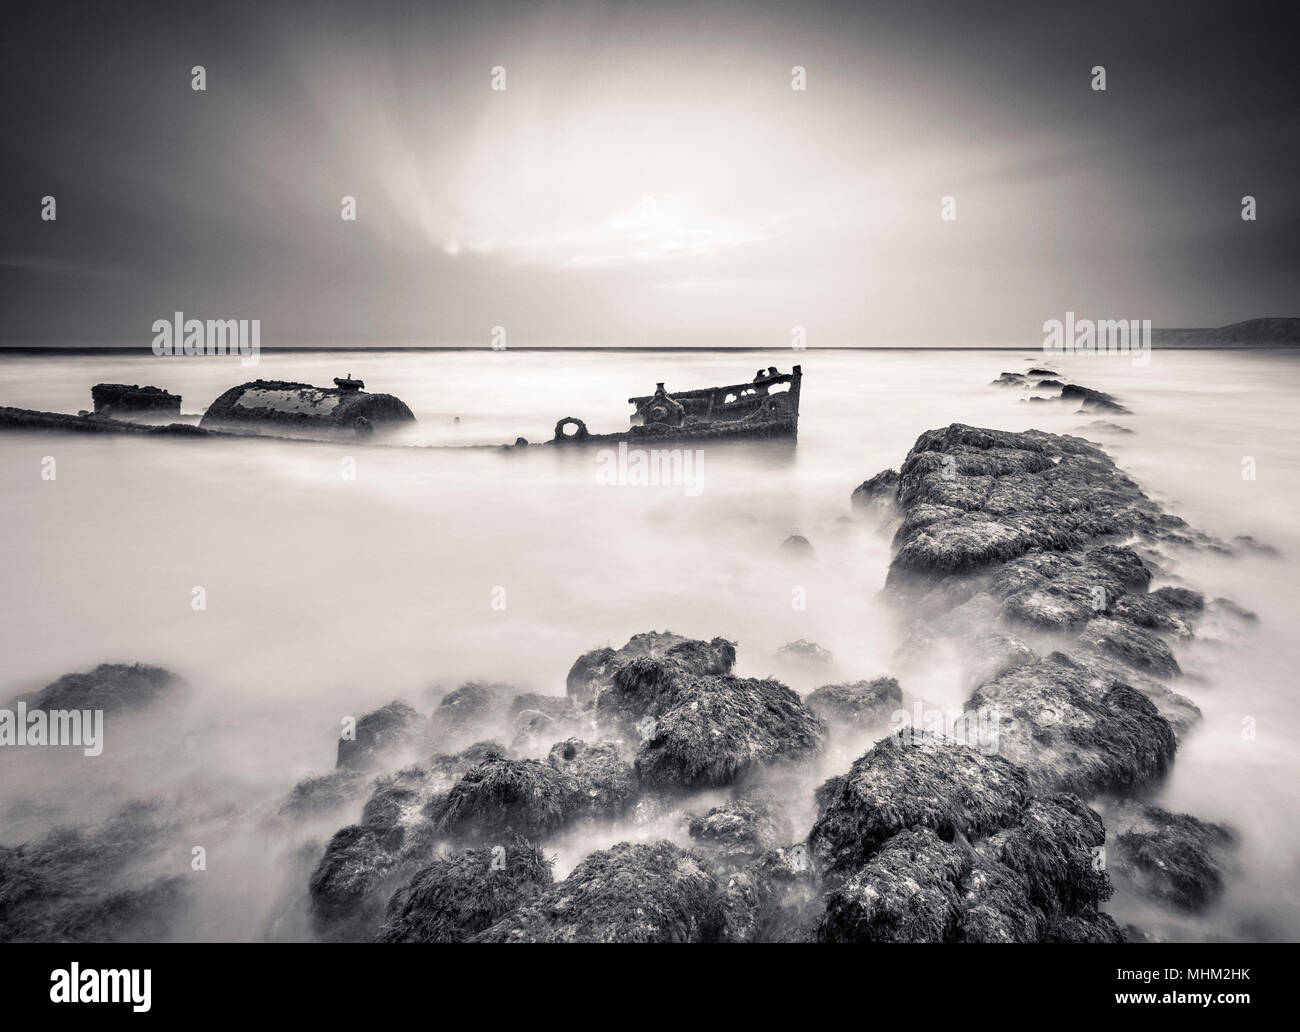 Black and white ship wreck, long exposure with sea and rocks. Stock Photo